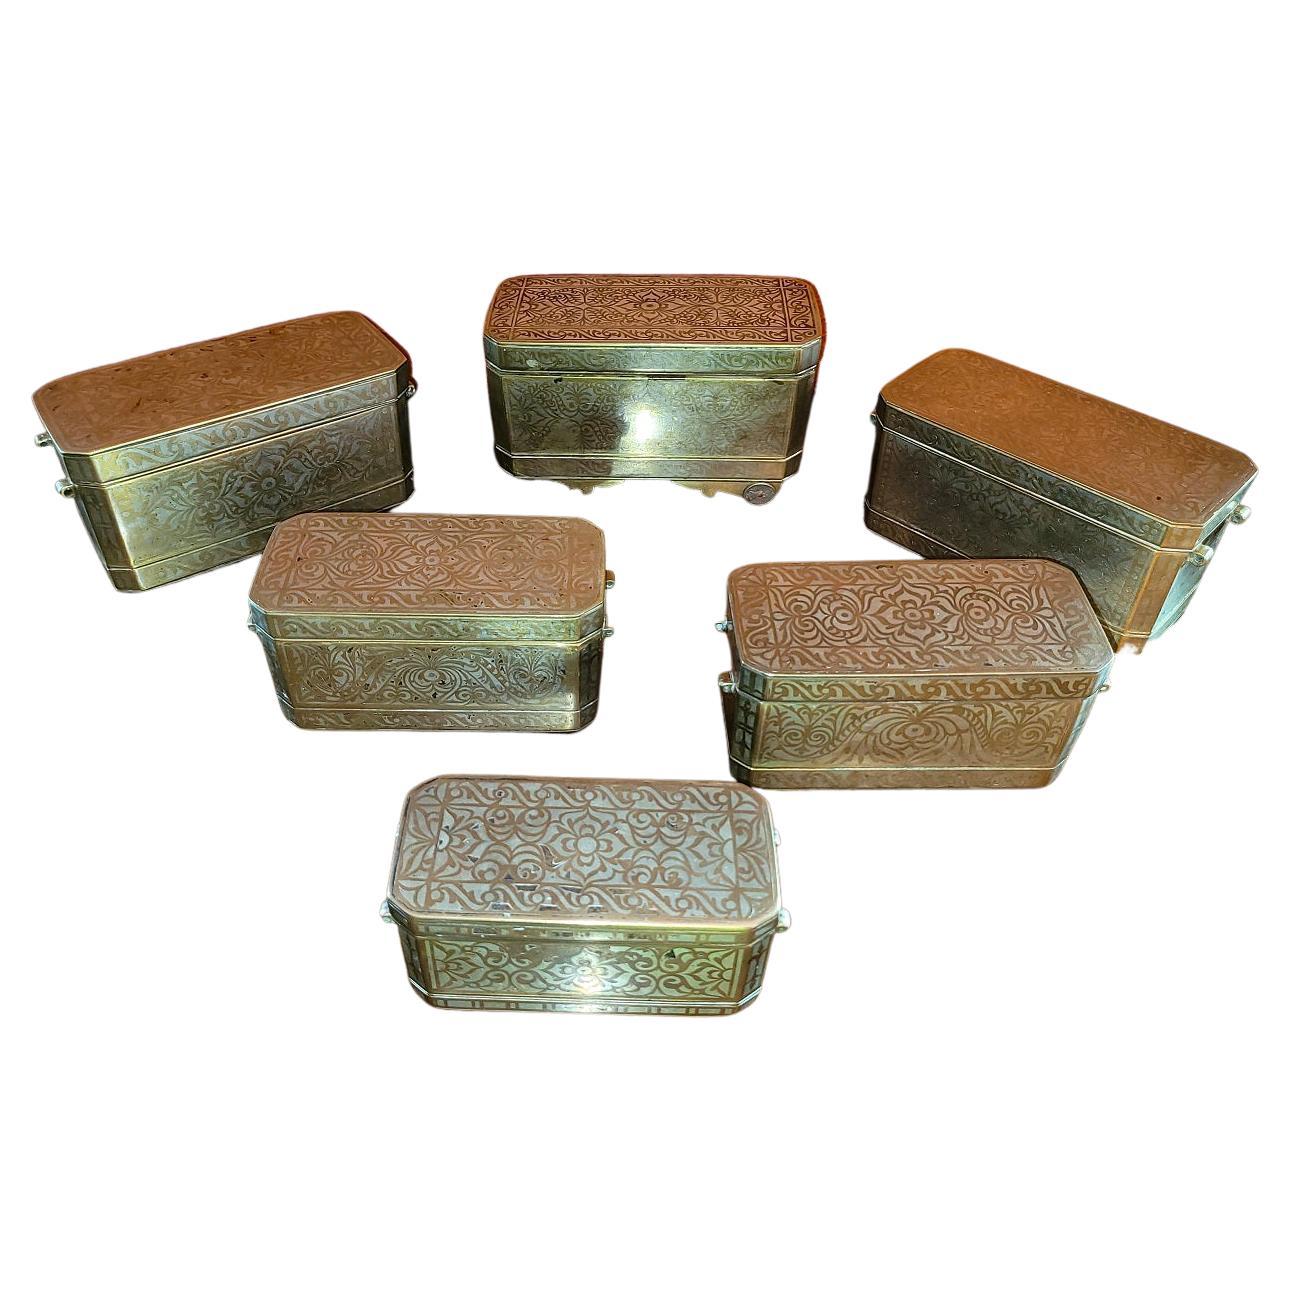 Set of 6 Mindanao Brass Silver Betel Boxes, Philippines